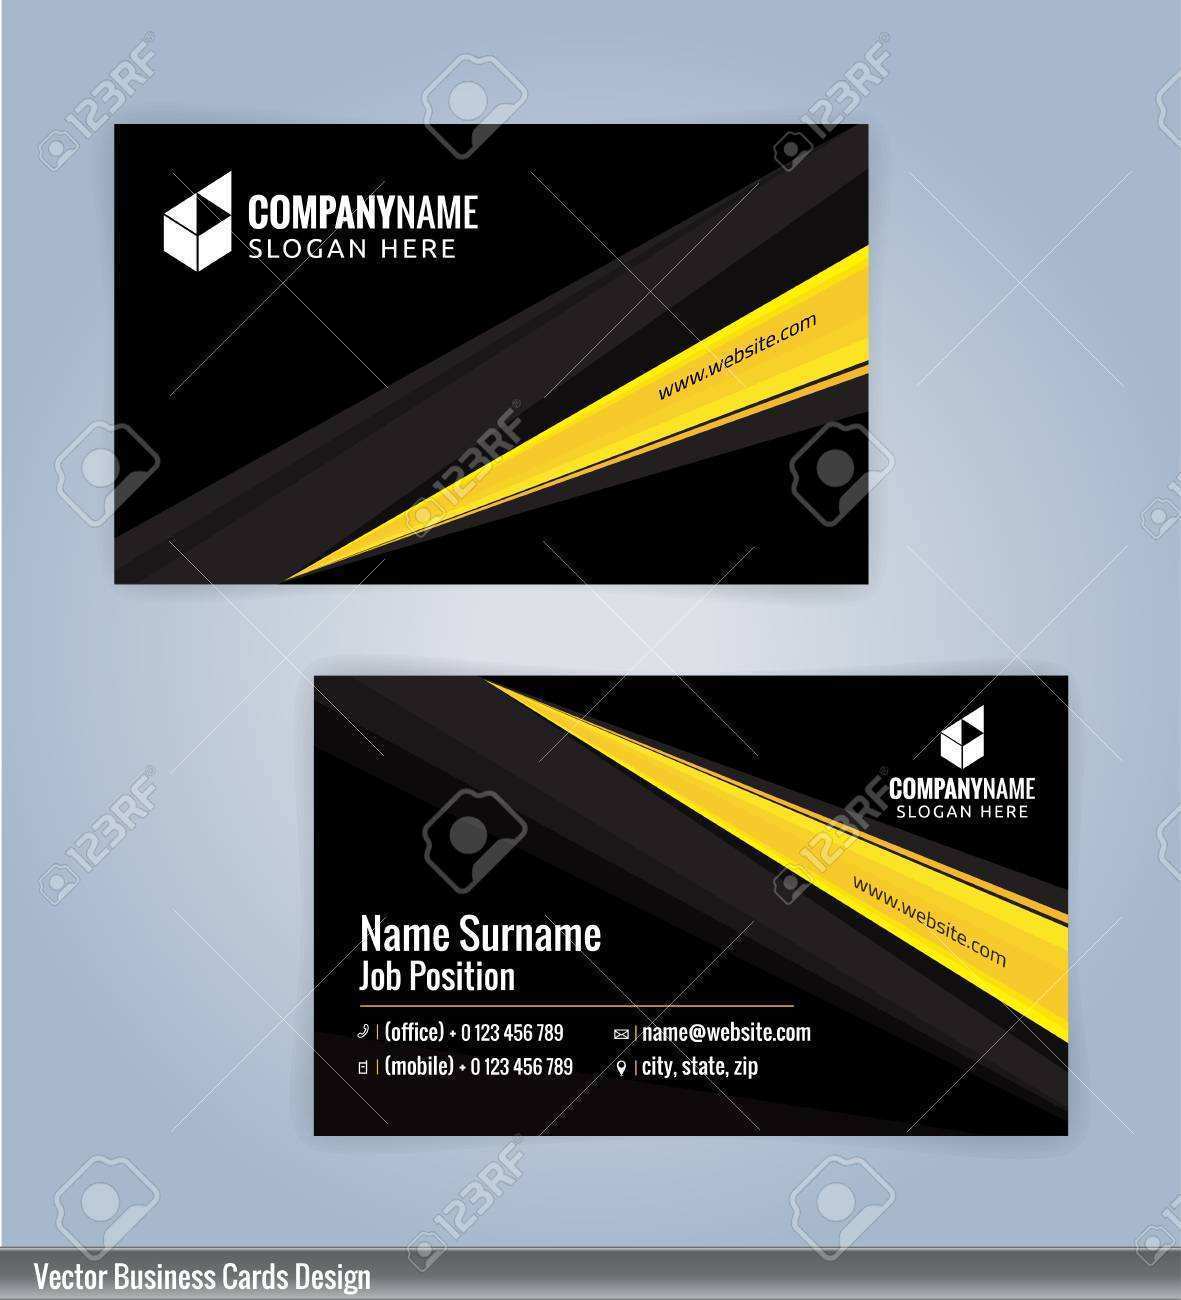 43 Adding Business Card Template Illustrator Vector Free Maker for Business Card Template Illustrator Vector Free